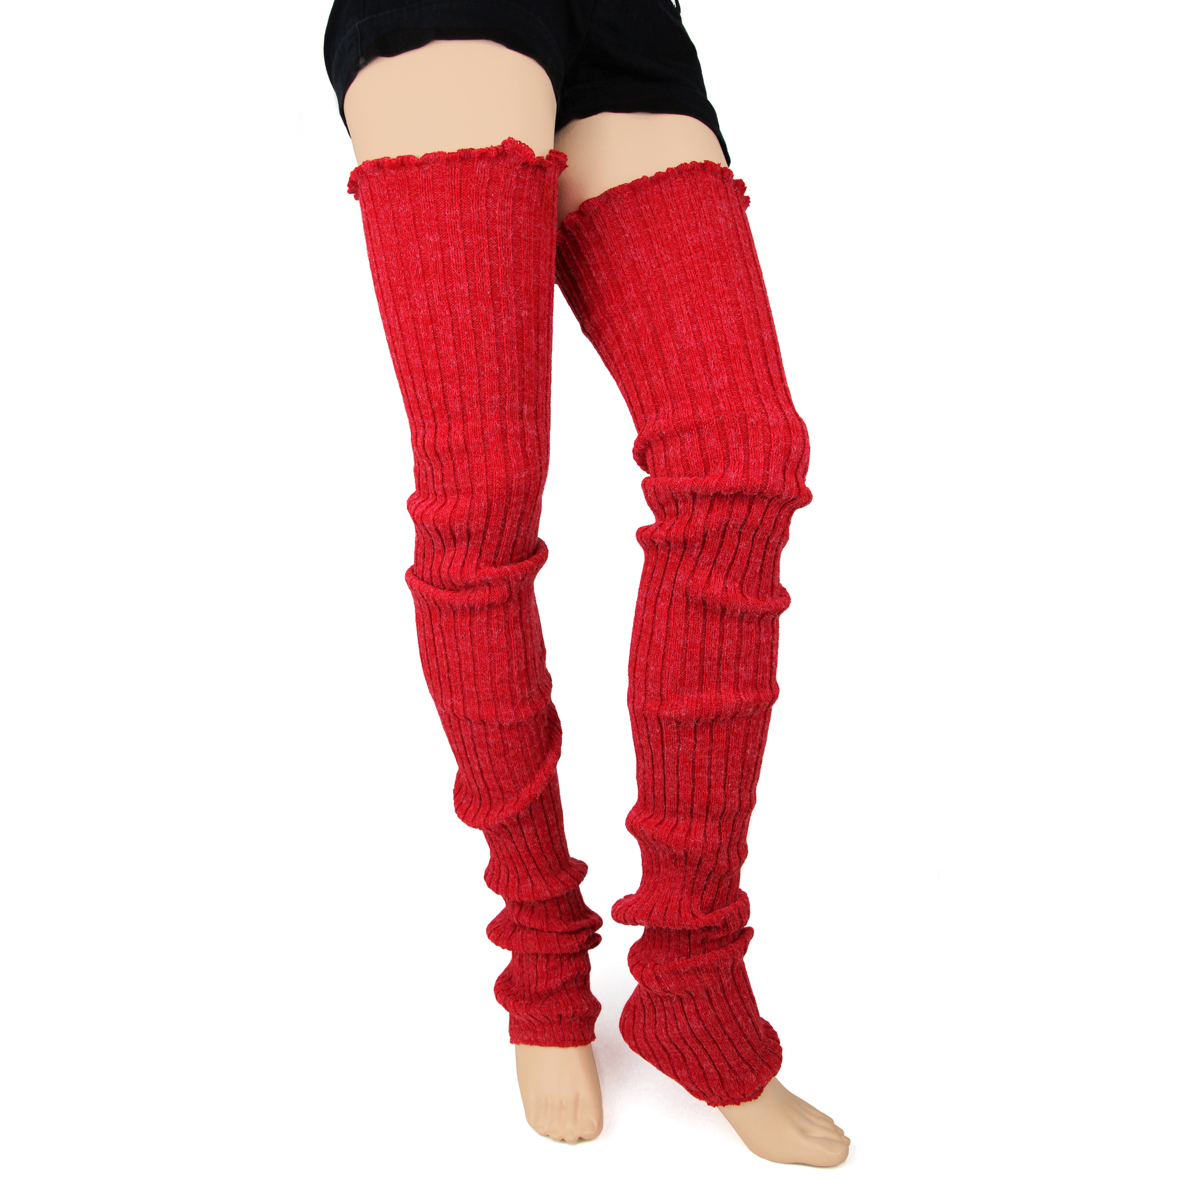 Best Cable Knit Leg Warmers for Cozy Winter Style